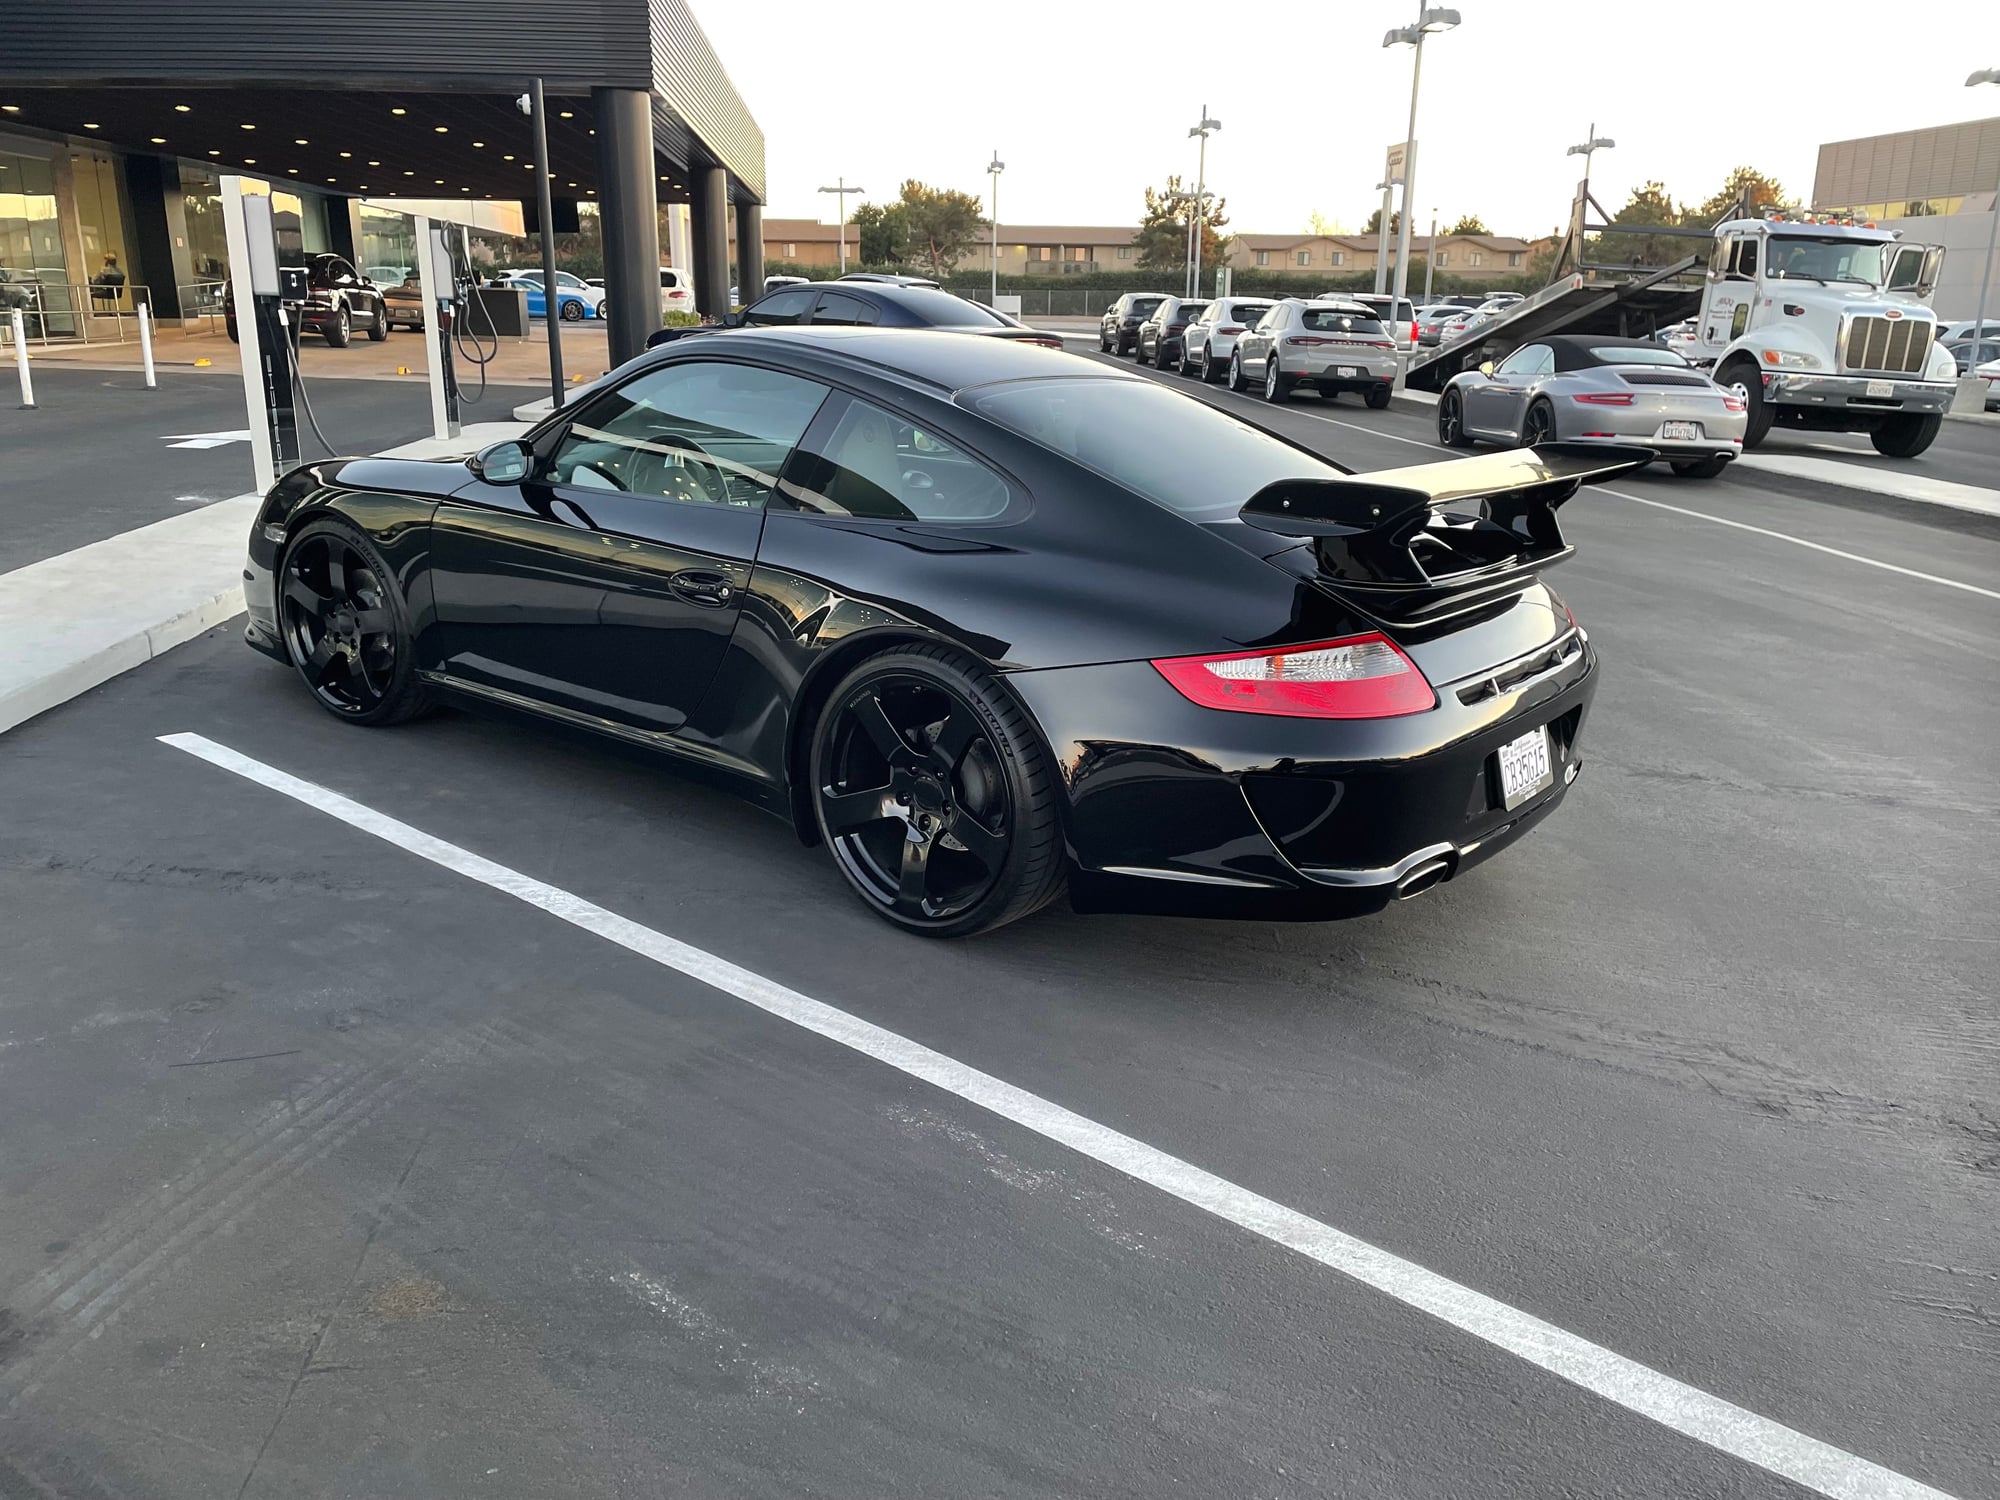 2006 Porsche 911 - Rinspeed 20" C5 black wheels w/ Pilot Sport 4S tires - Used - VIN WPOAA29915S715699 - 120 Miles - Coupe - San Diego, CA 92107, United States